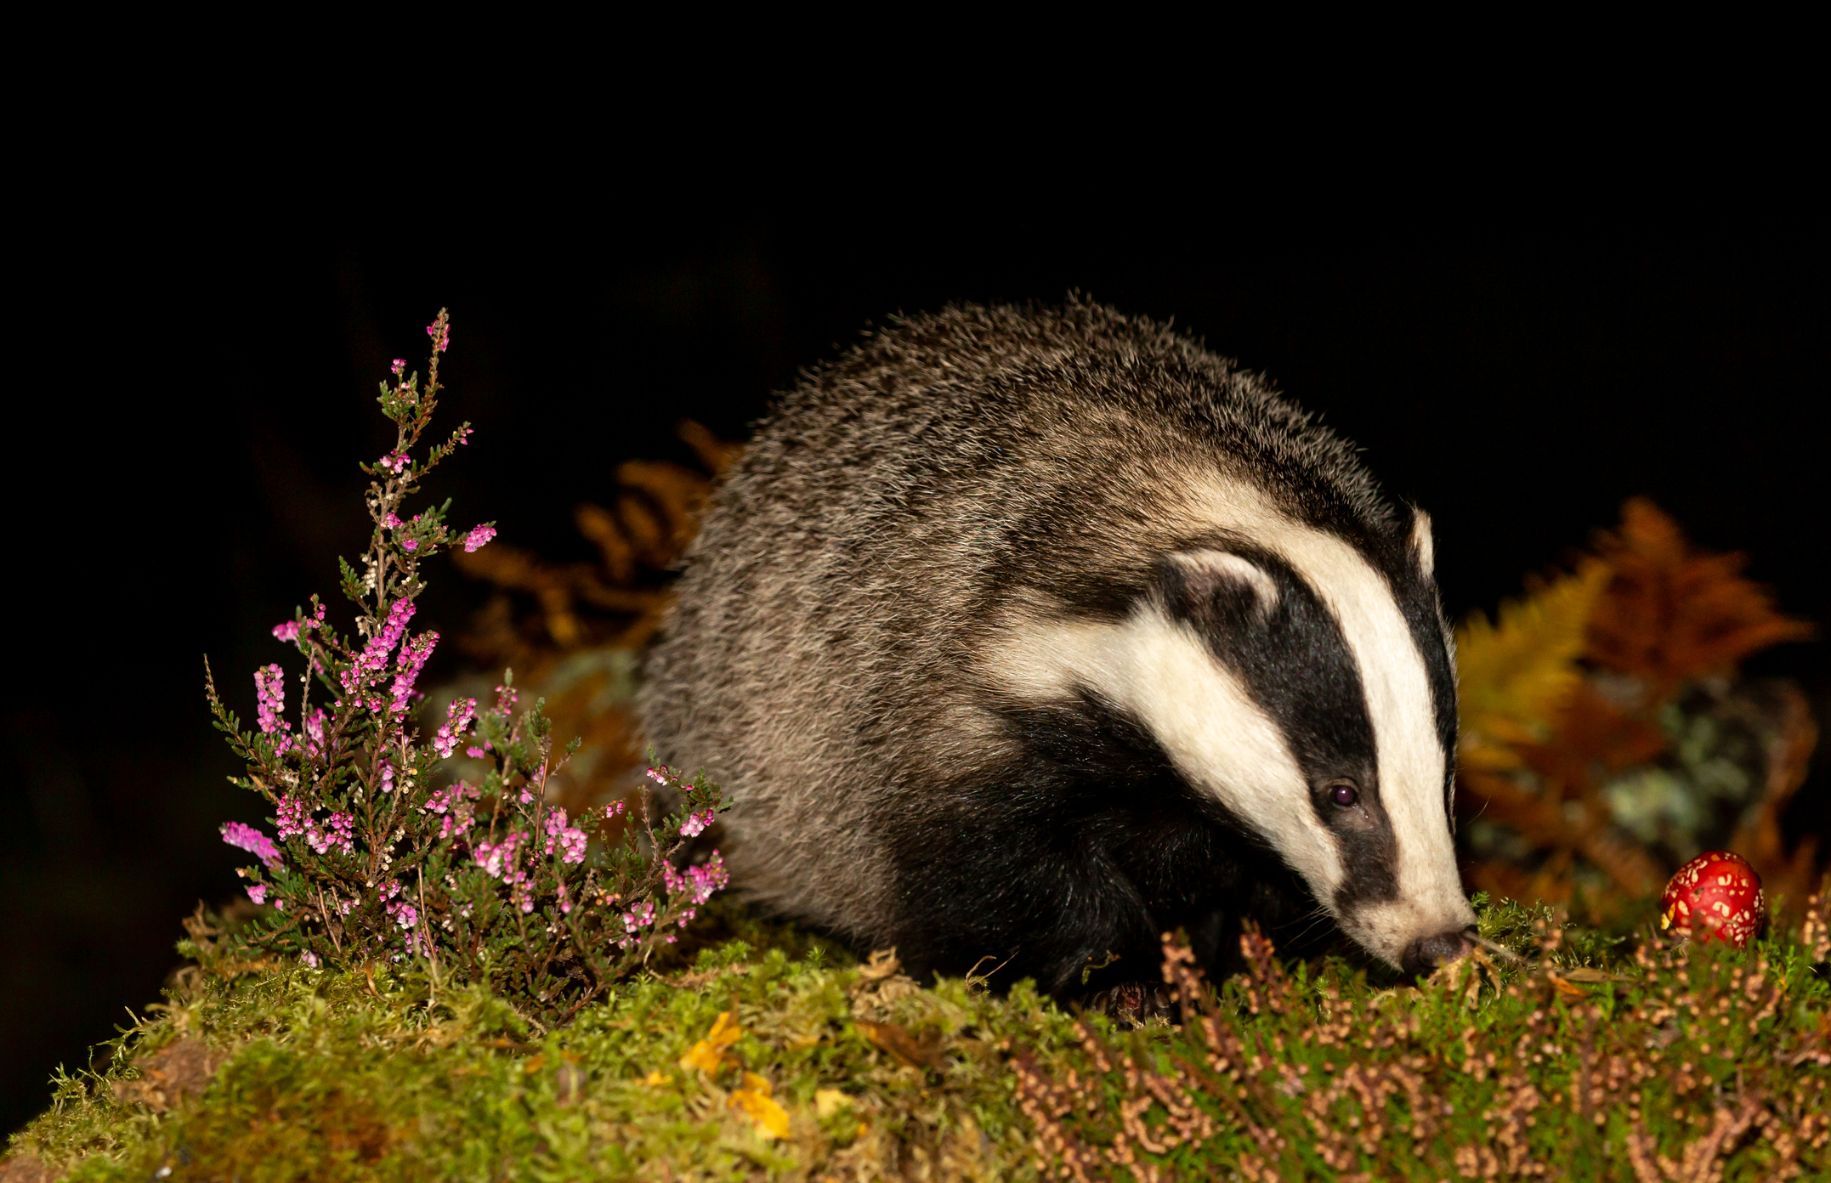 A badger in the forest at night.